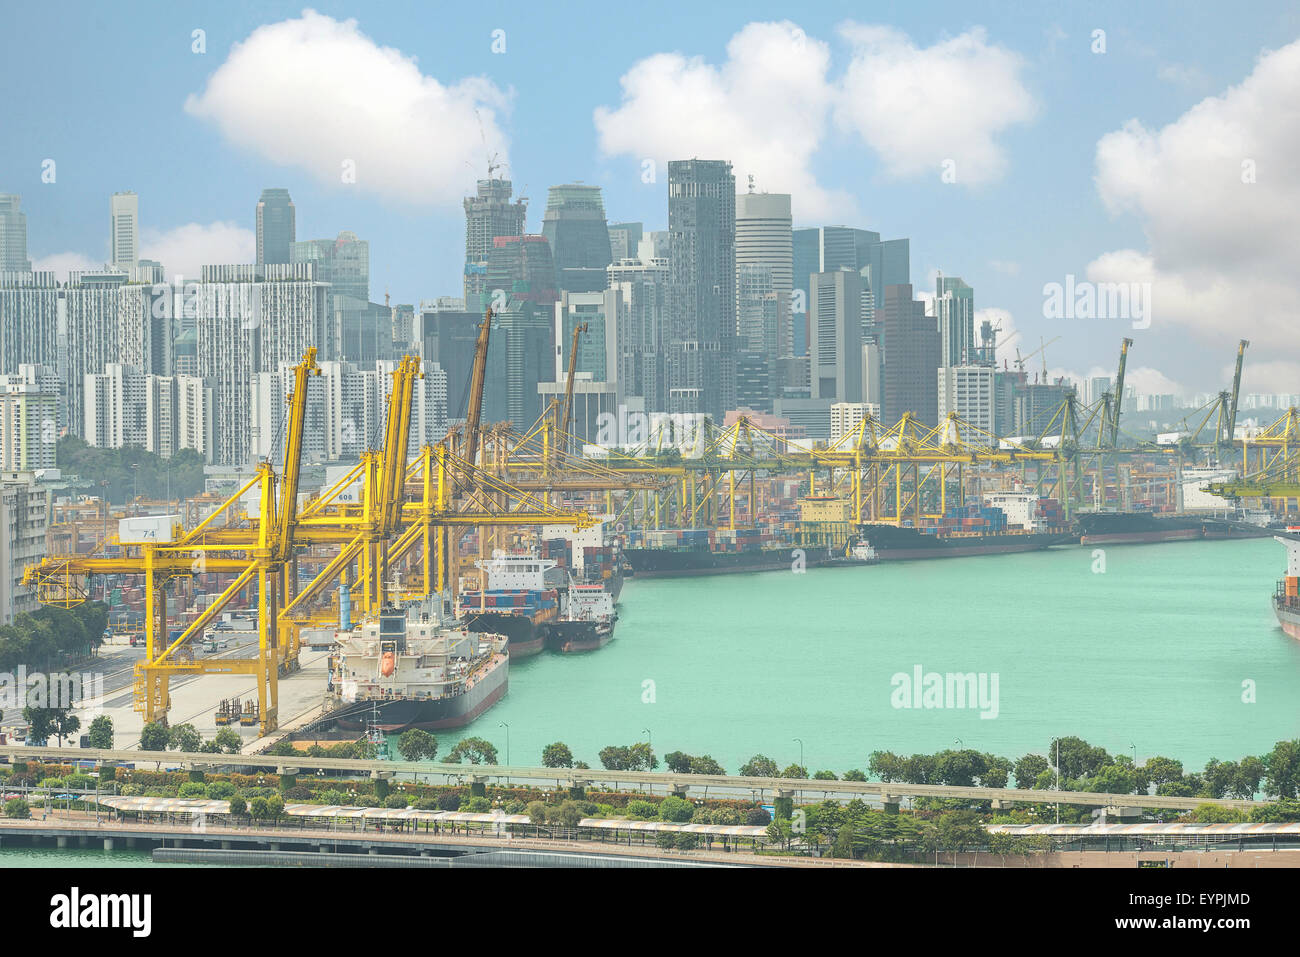 Singapore cargo terminal,one of the busiest ports in the world, Singapore. Stock Photo